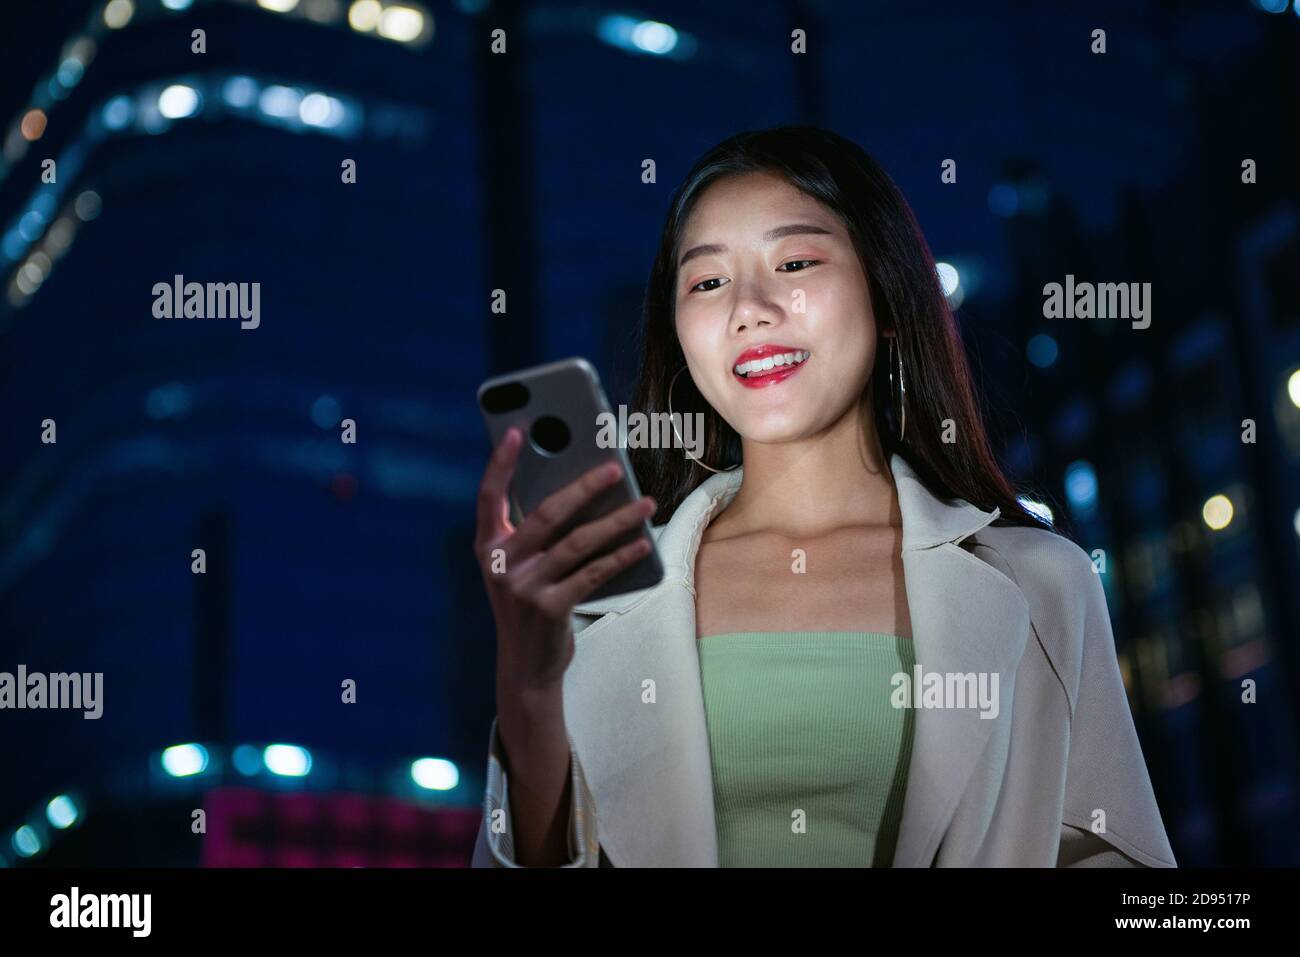 Young pretty Asian woman using mobile phone in the city at night with building bokeh light in background Stock Photo